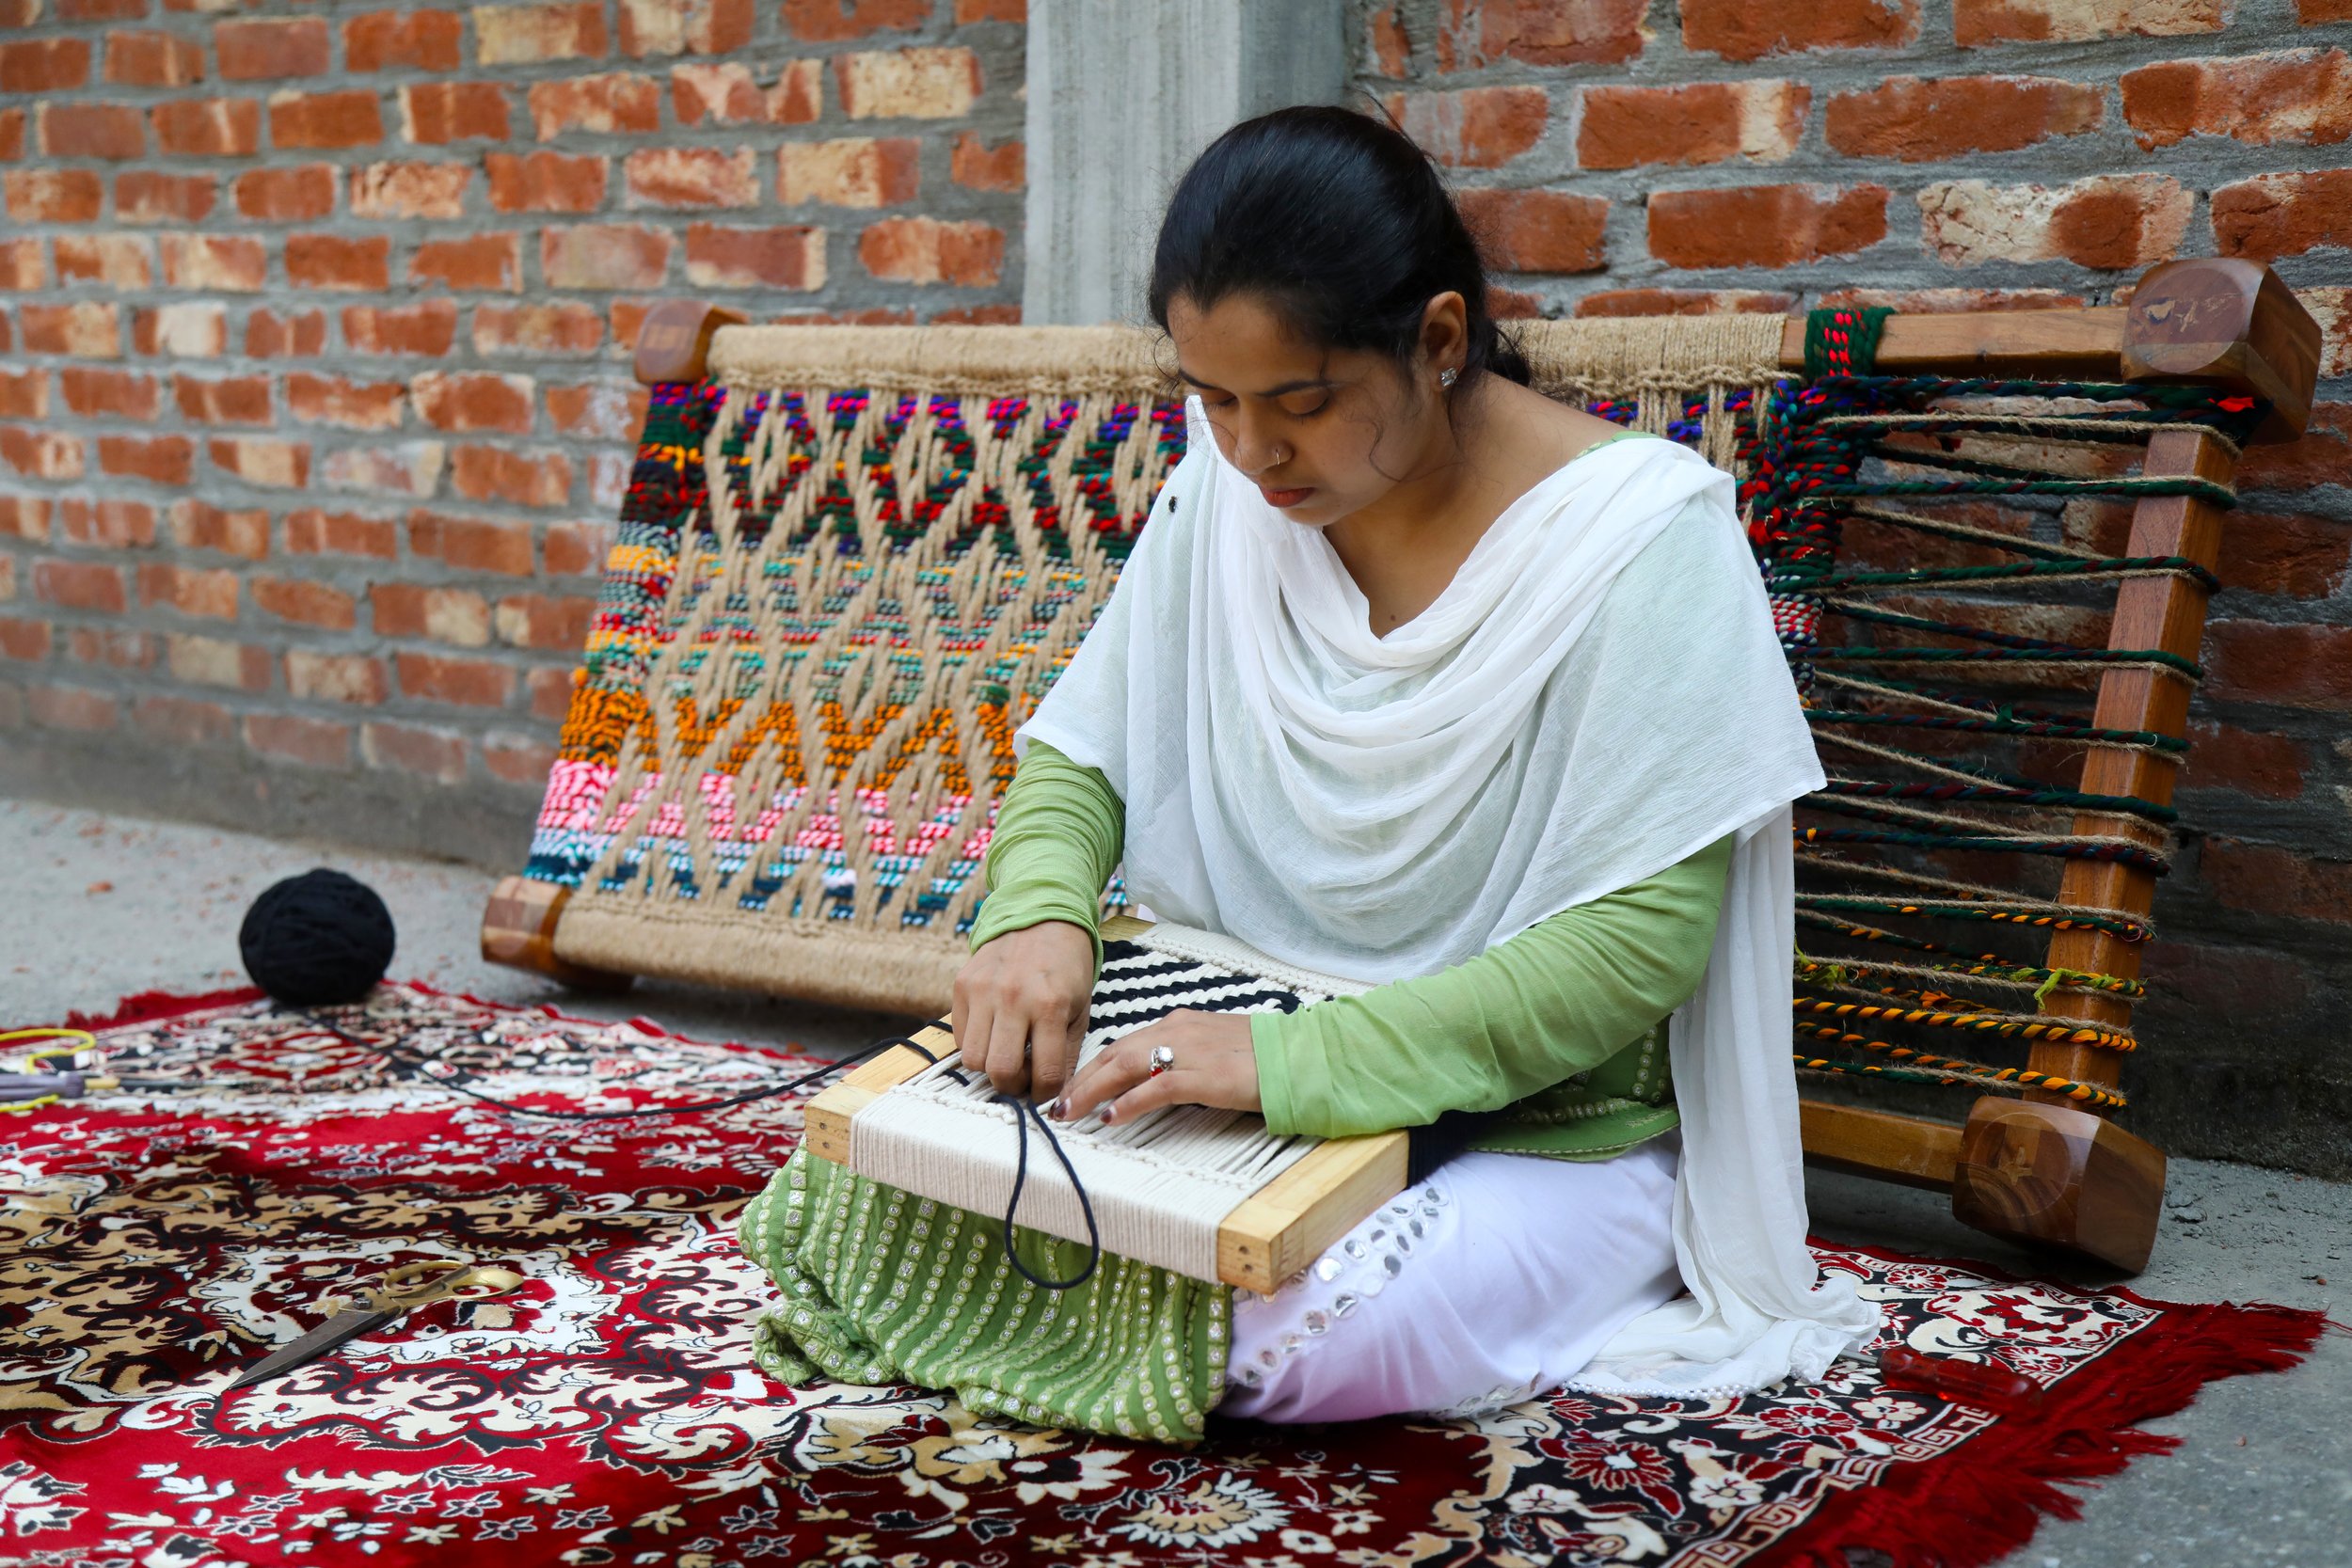 Sheeba is one of Sirohi's master weavers. She and her sister, Shahiba, weave the larger items, such as the charpais, benches, tables, and chairs.